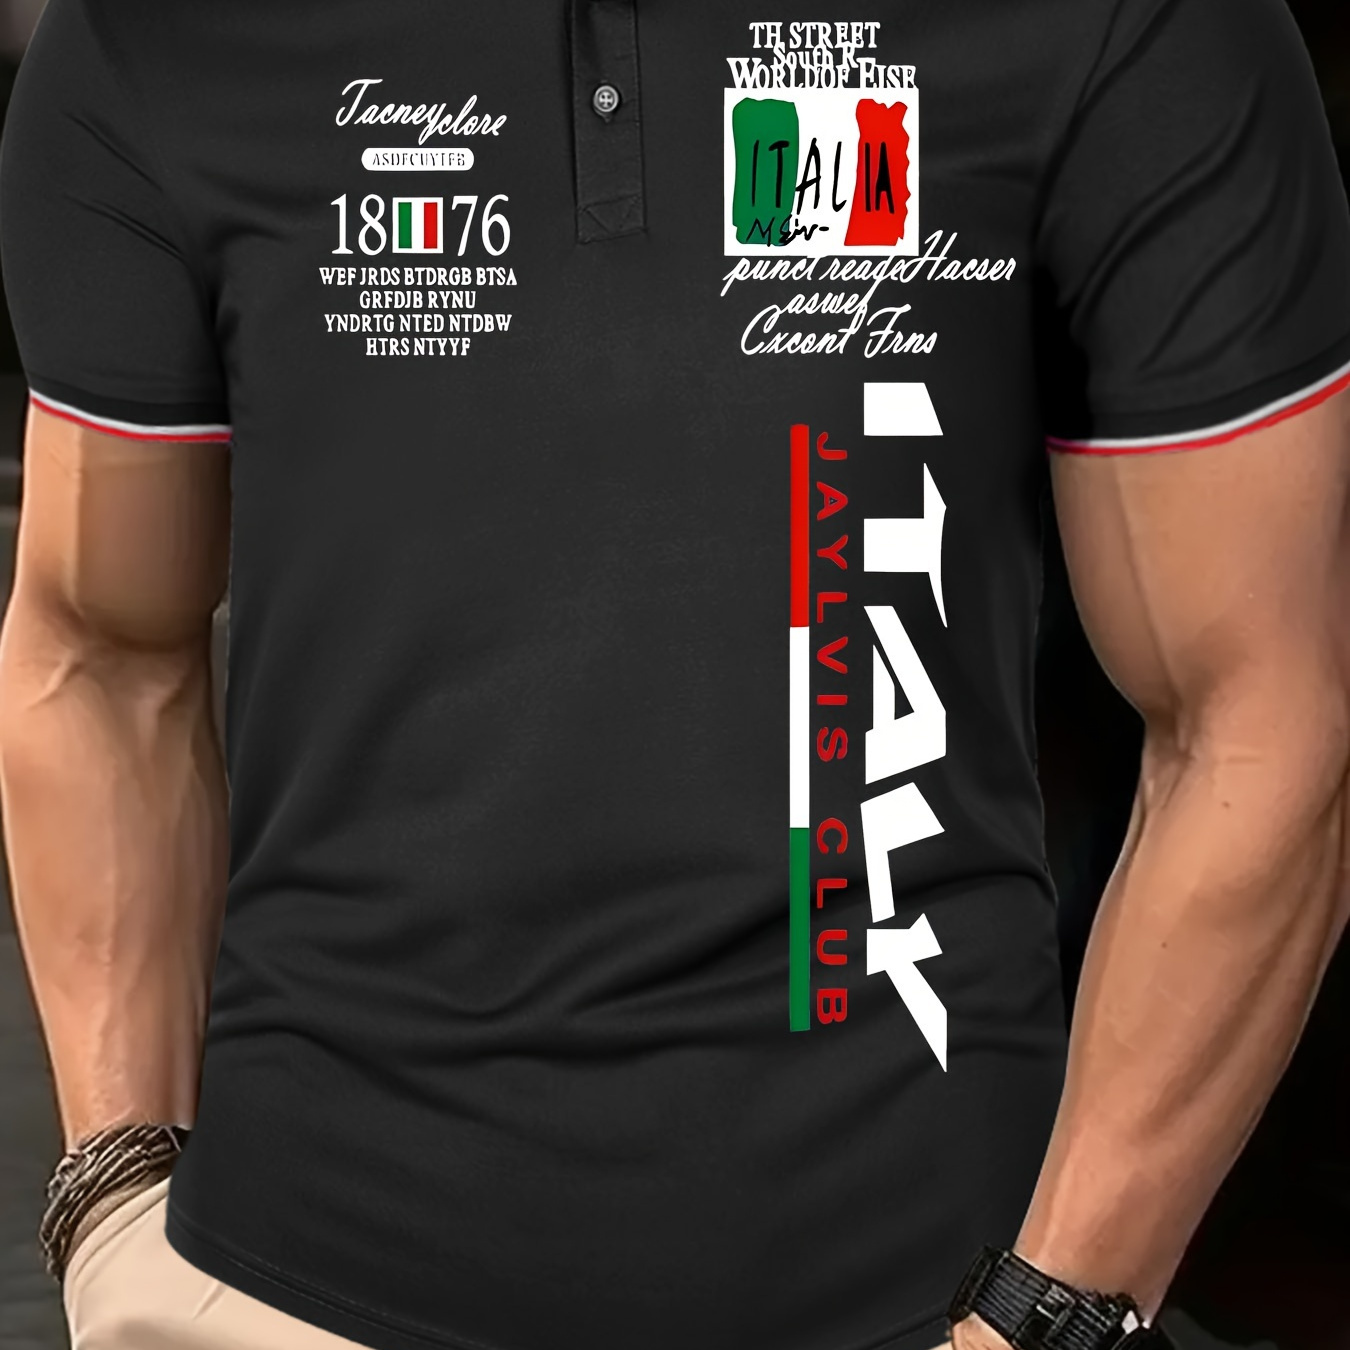 

Italy Flag & Creative Letters Print Men's Trendy Henley T-shirt, Fashion Short Sleeve Casual Golf Tee, Comfy Breathable Lapel Business Top For Spring Summer Tennis Outdoor Activities Holiday As Gifts